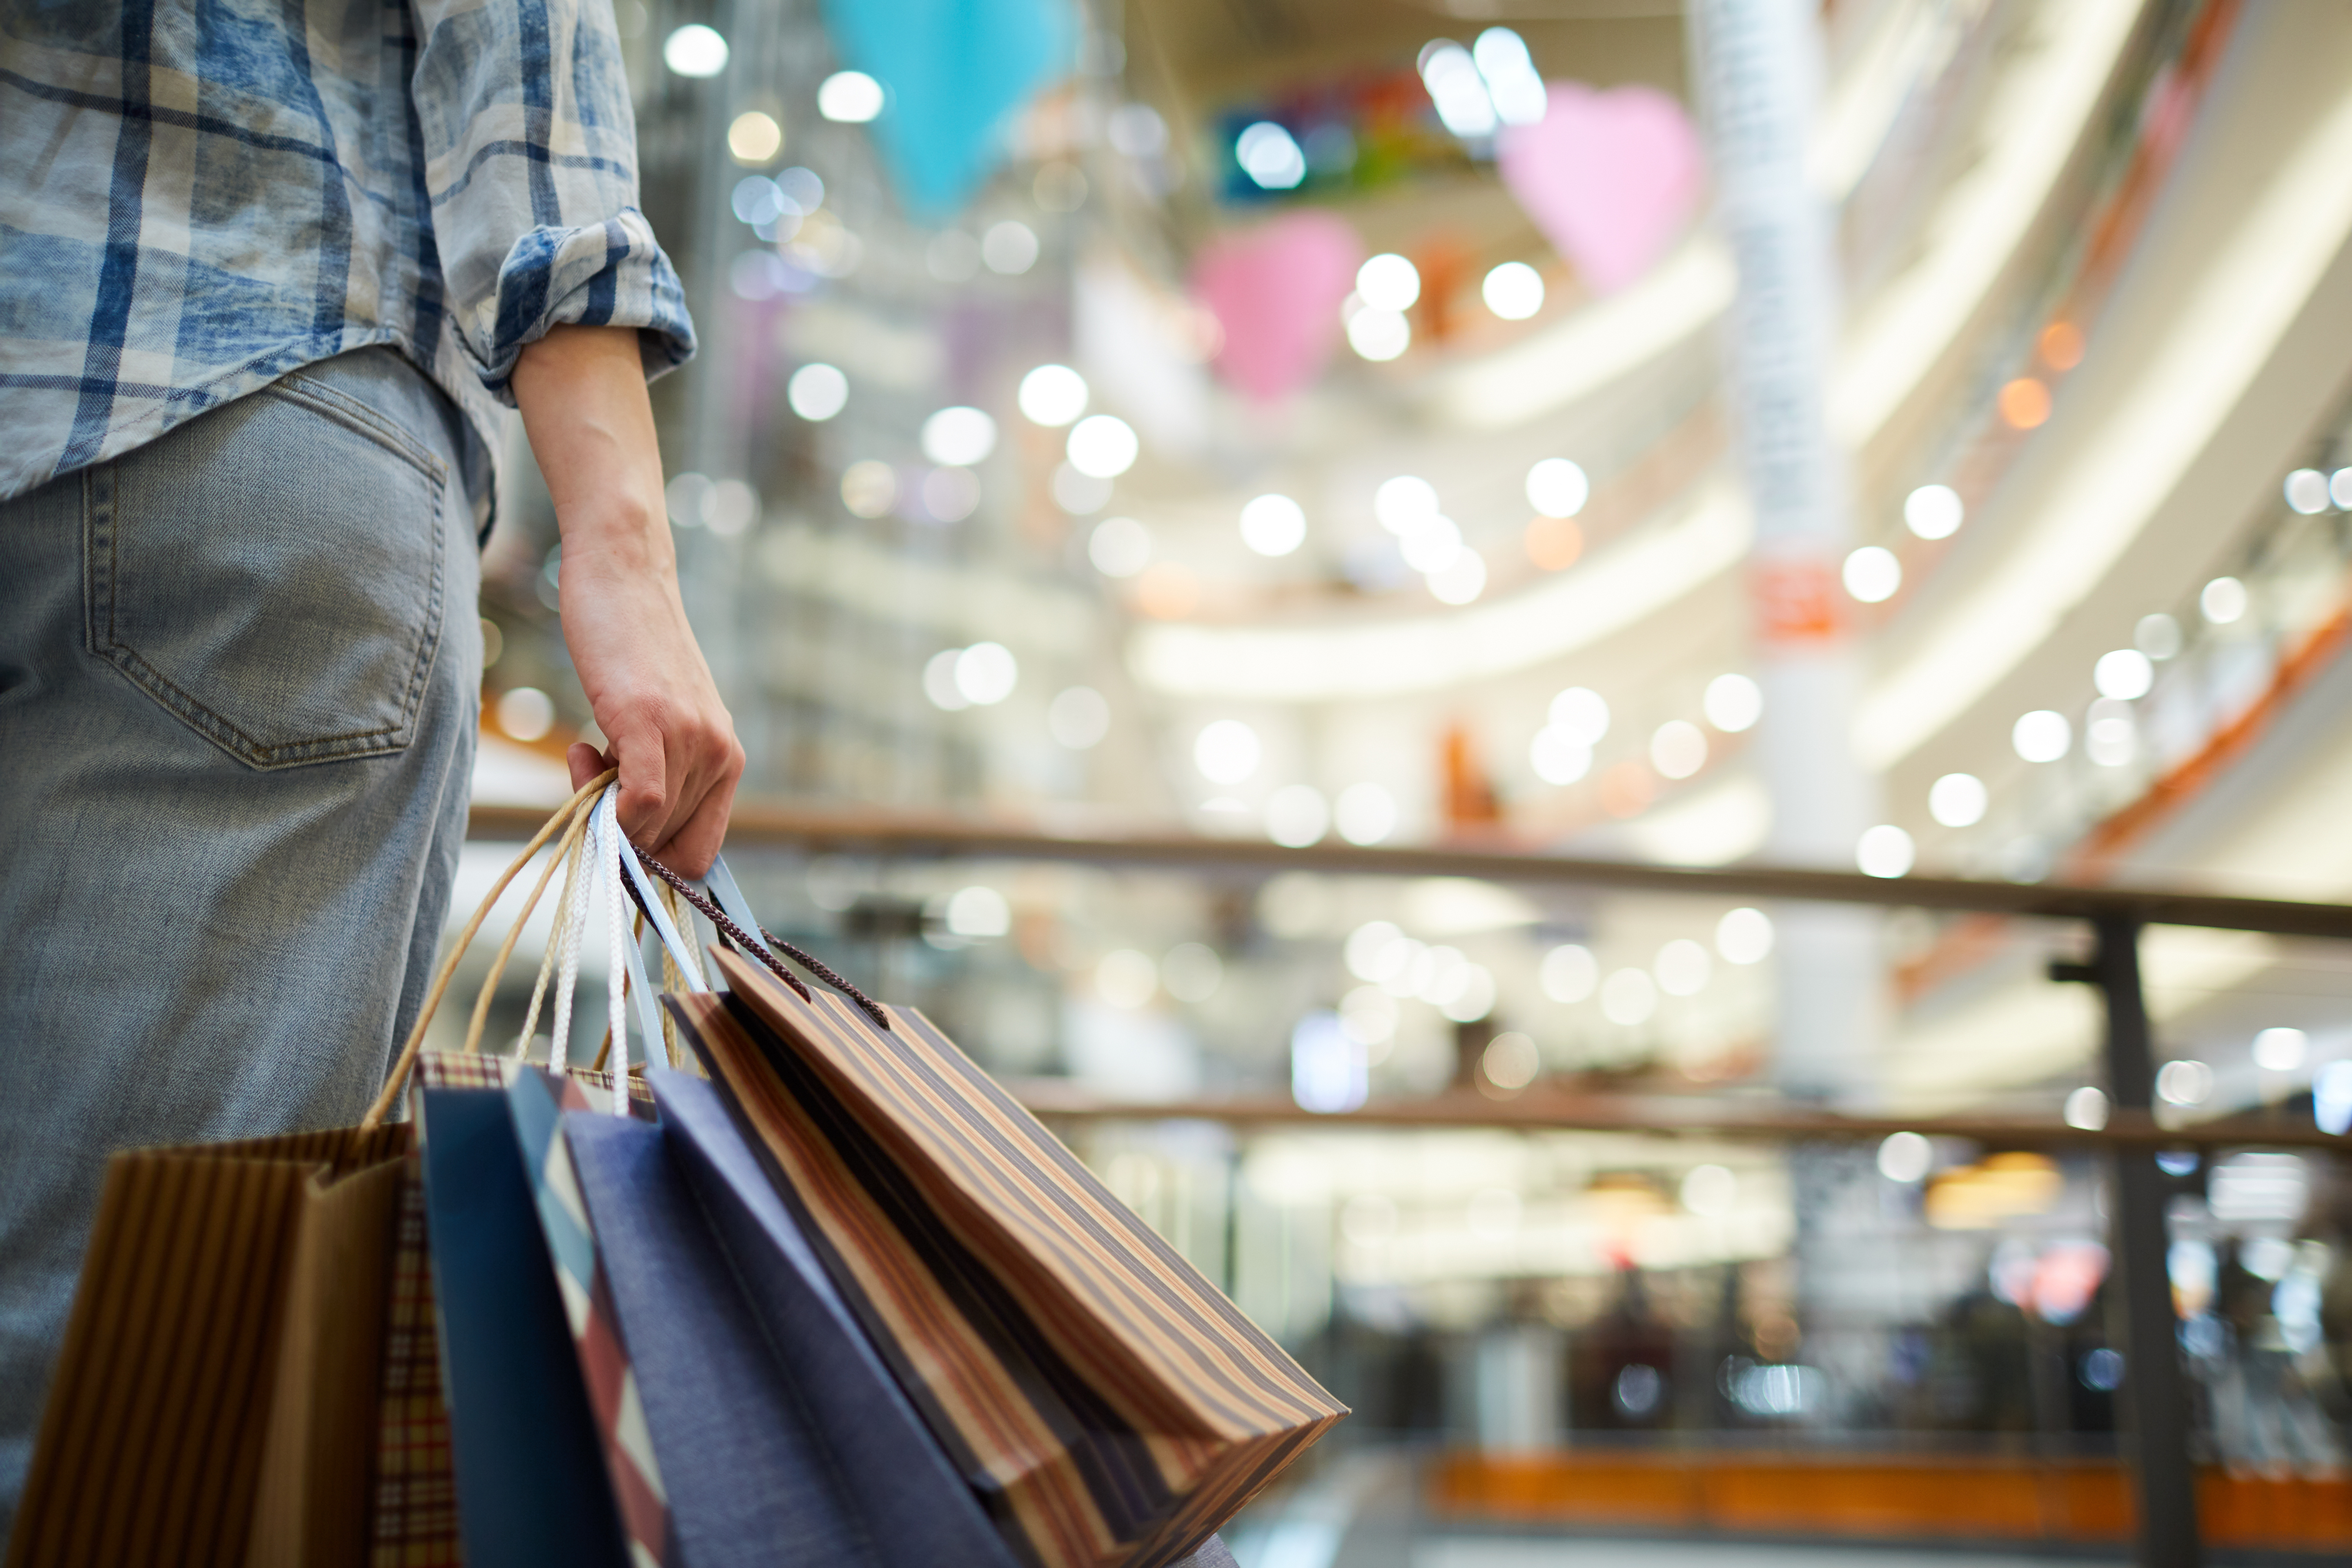 Checkout and promo abuse: The latest fraud impacting retailers